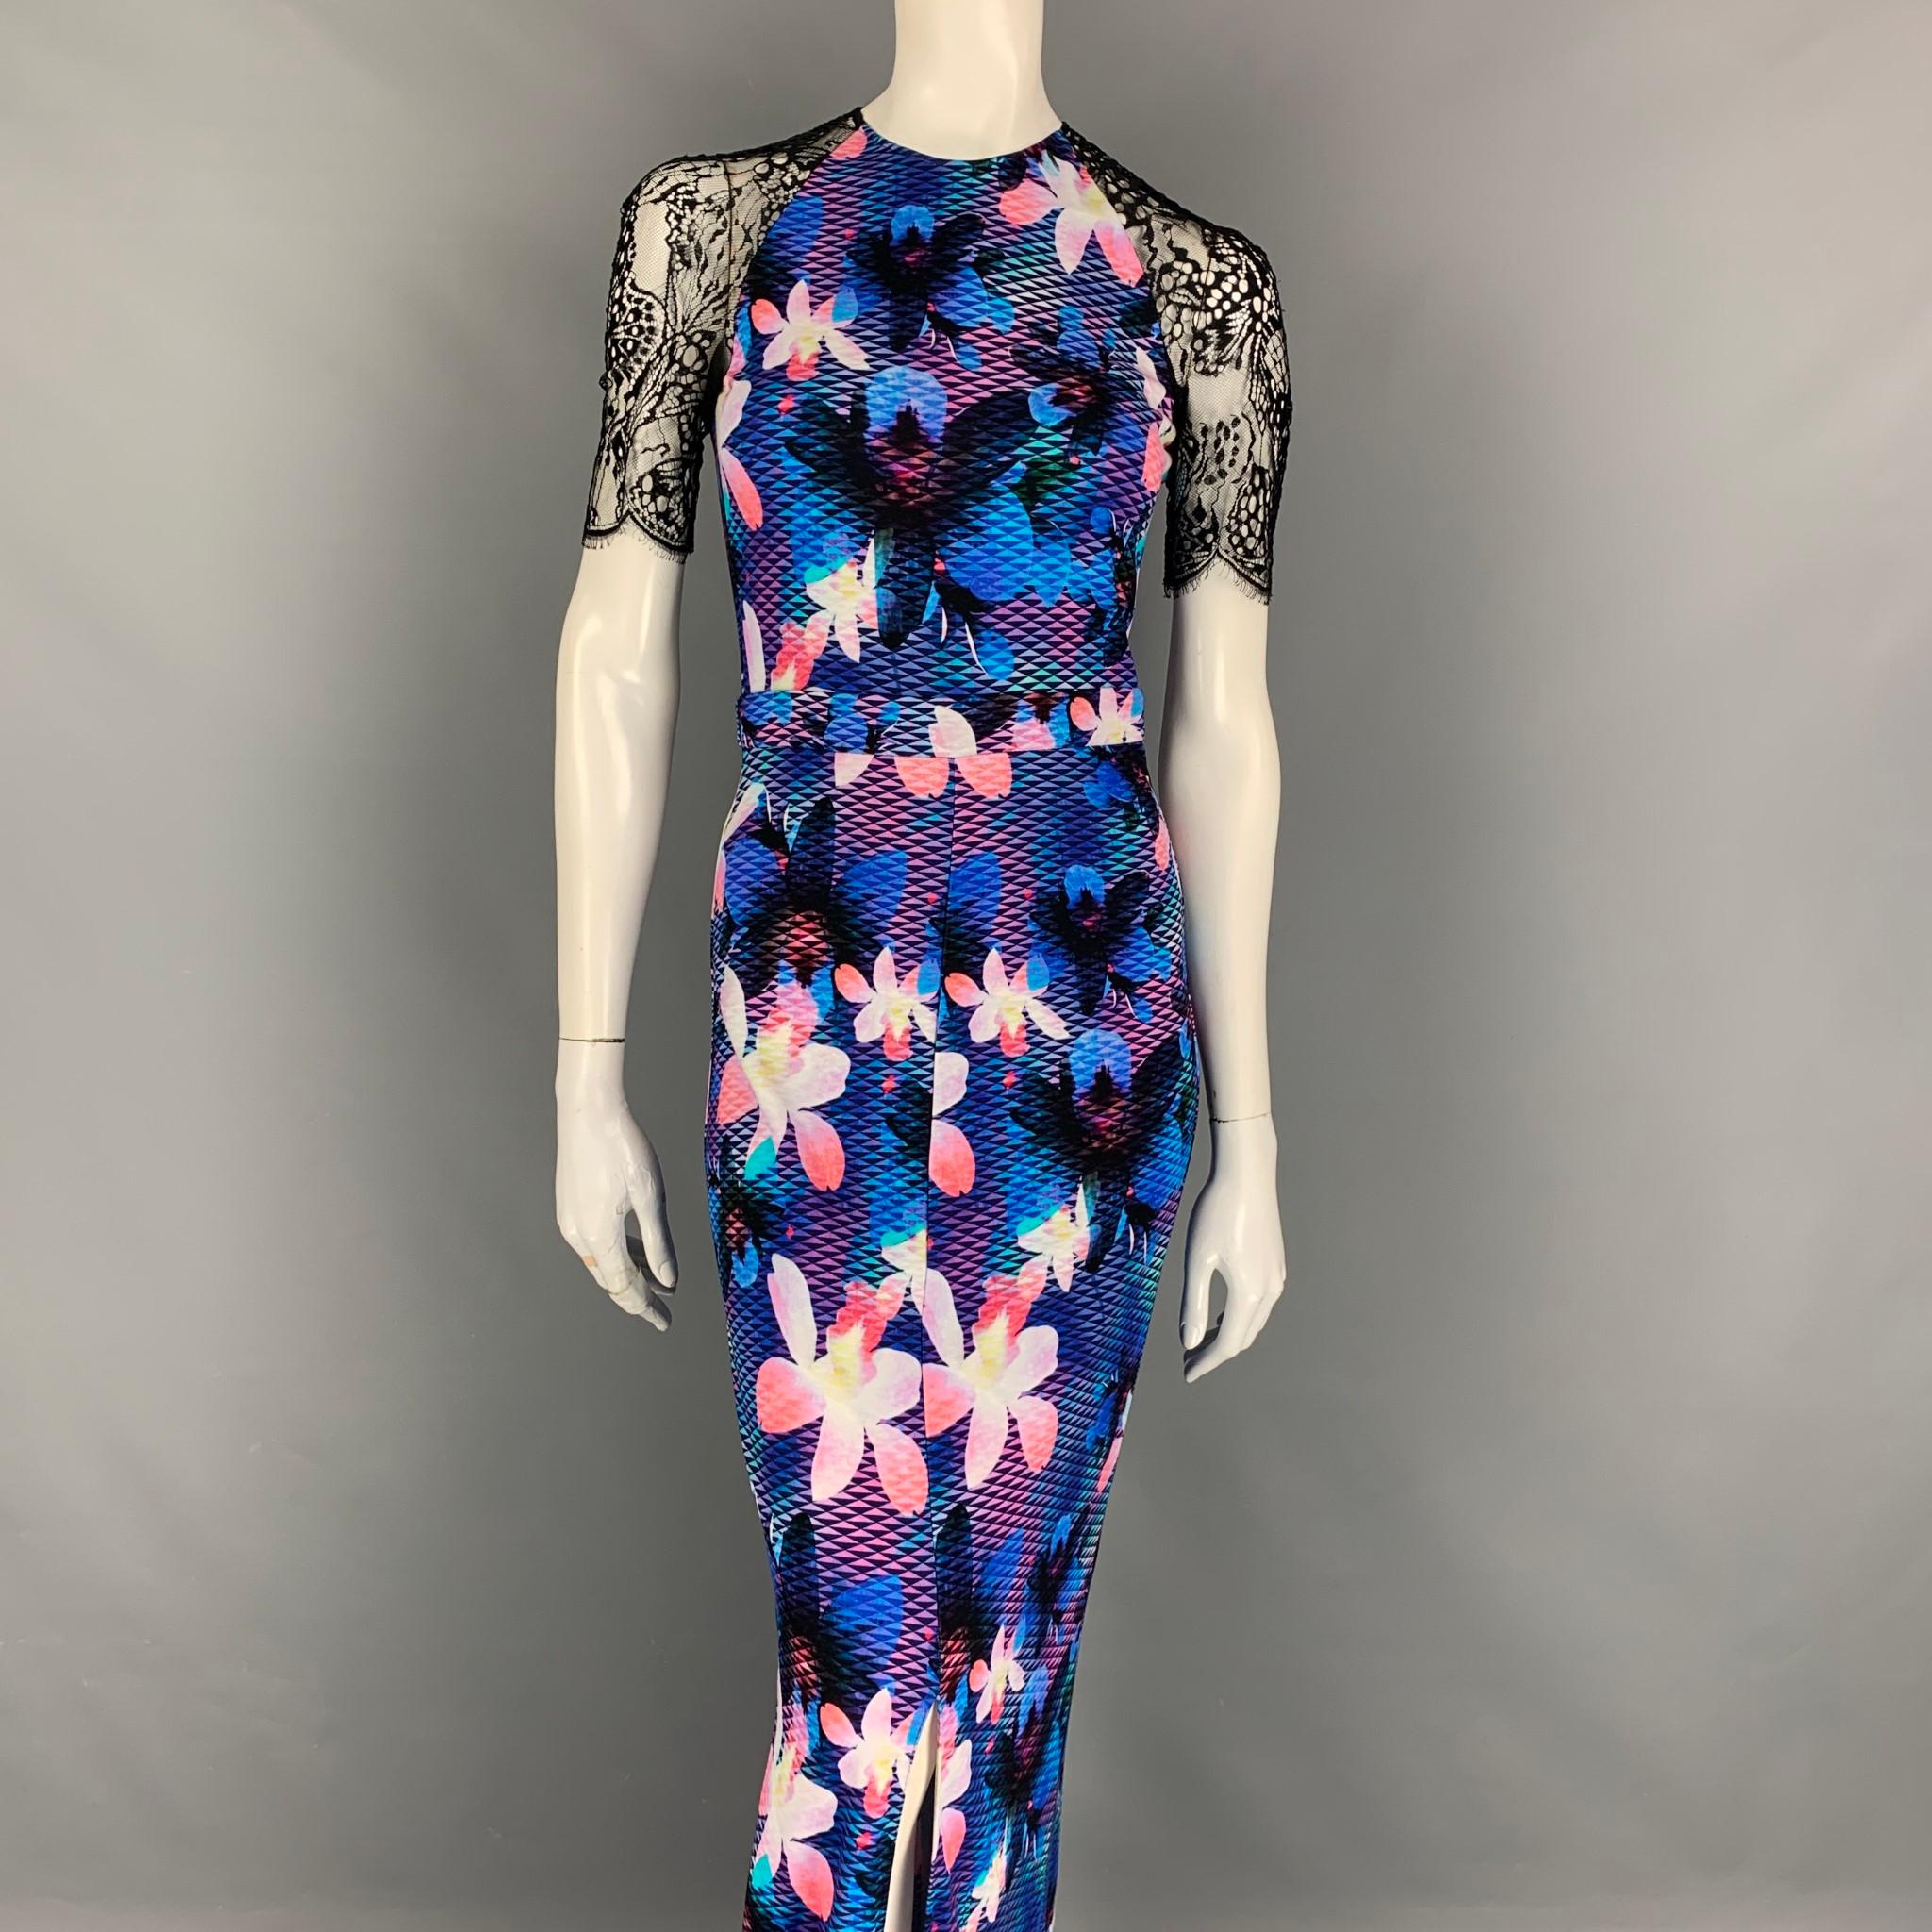 MATTHEW WILLIAMSON dress comes in a multi-color viscose featuring a black lace panel, front slit, and a back zip up closure. Made in Italy. 

Very Good Pre-Owned Condition.
Marked: 8

Measurements:

Shoulder: 15 in.
Bust: 30 in.
Waist: 26 in.
Hip: